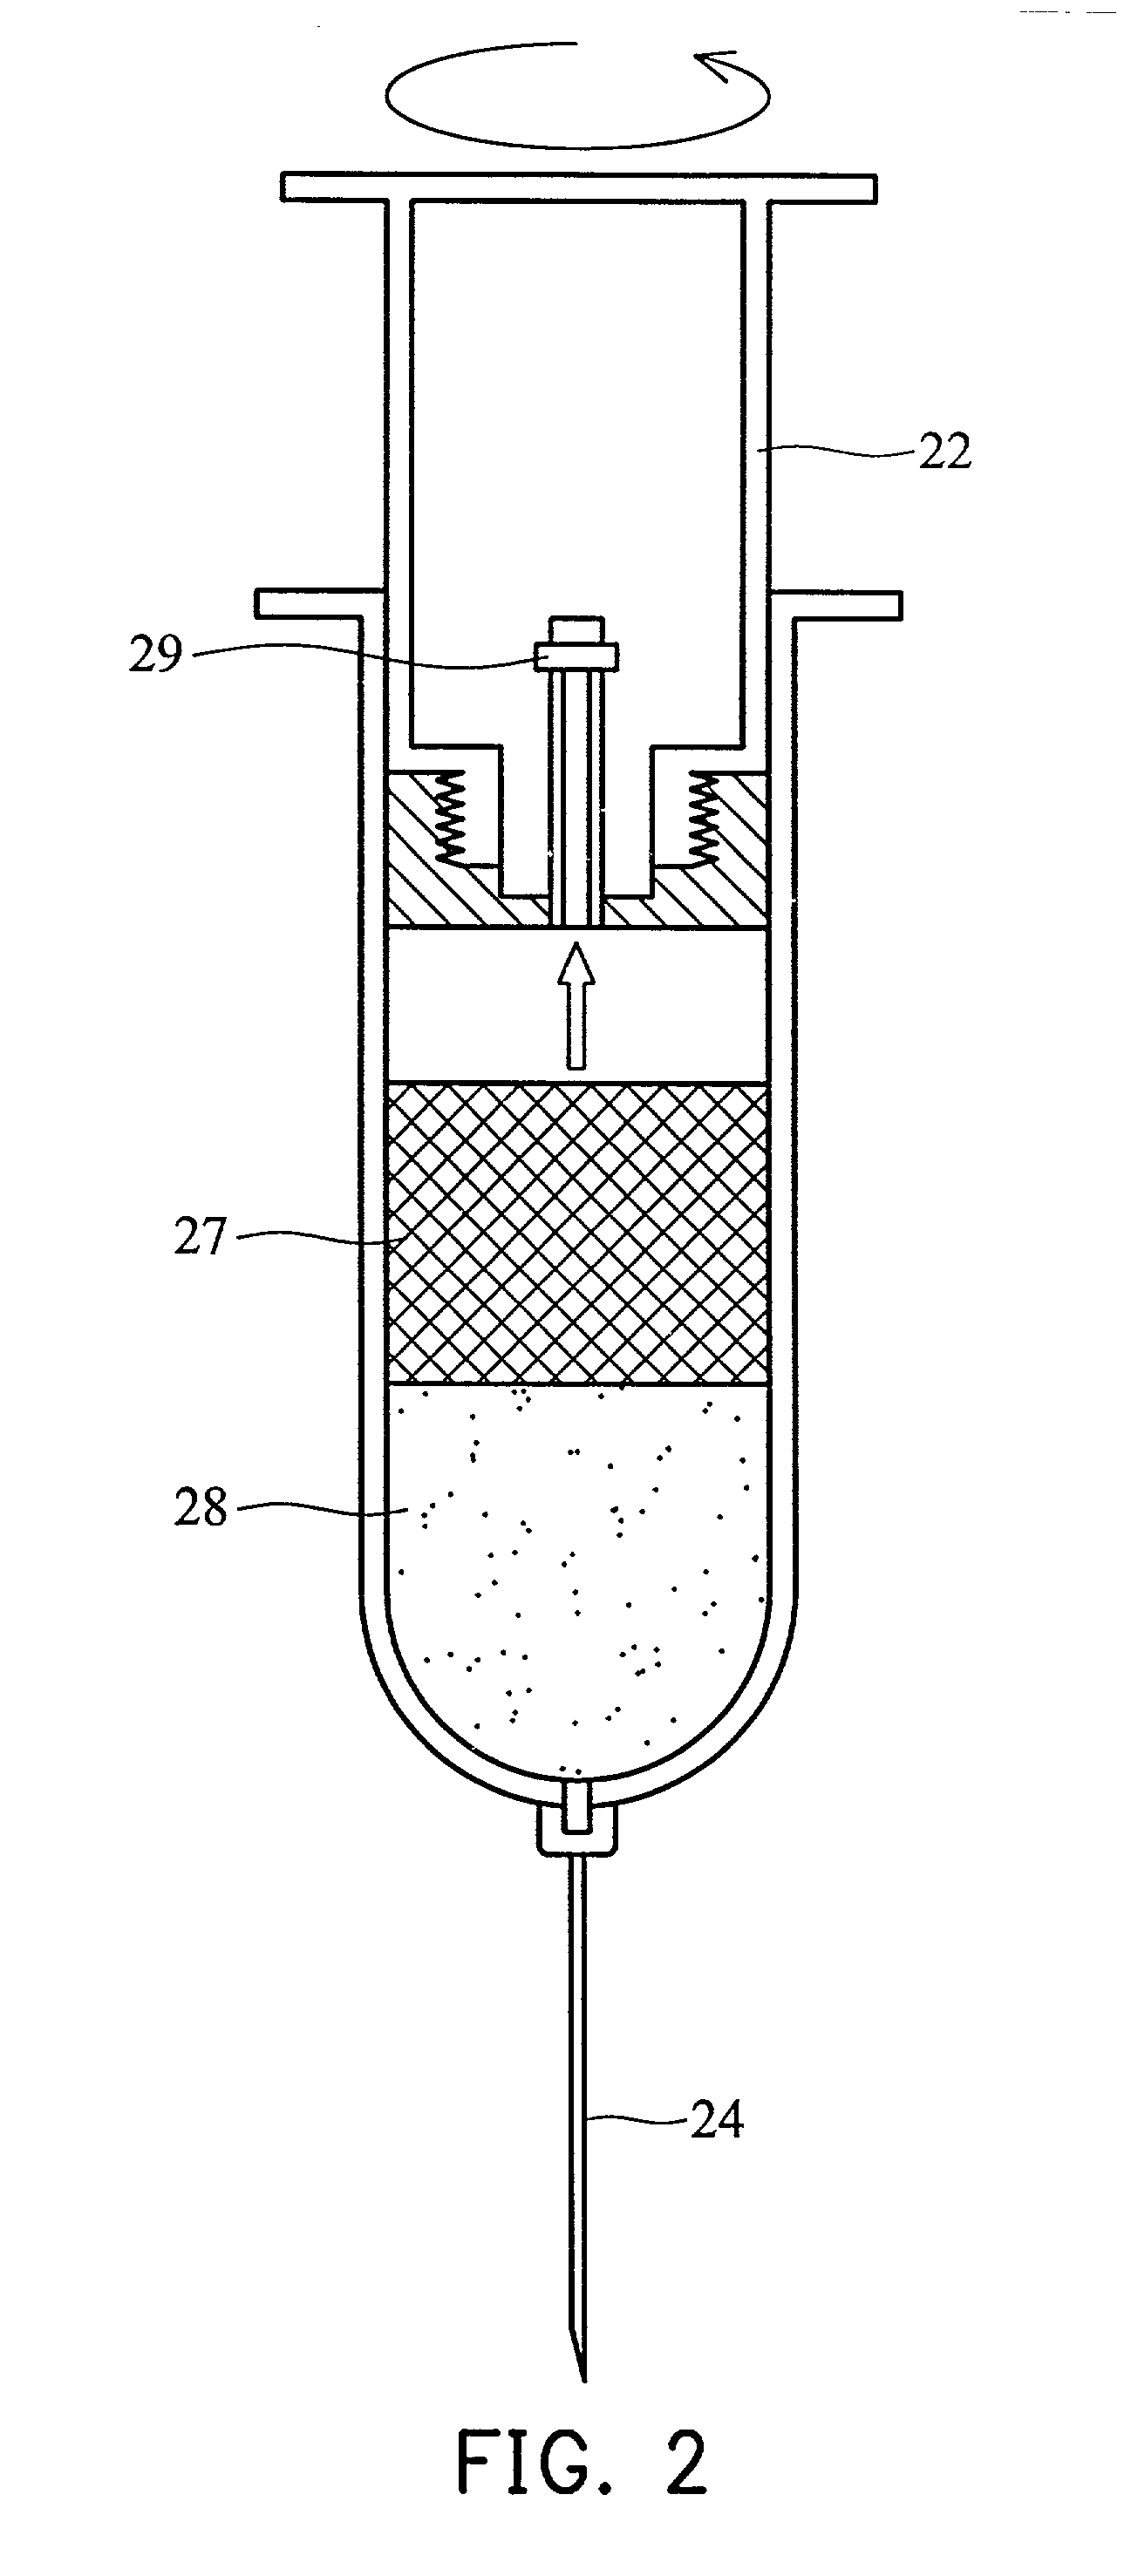 Method and apparatus for preparing and culturing cells